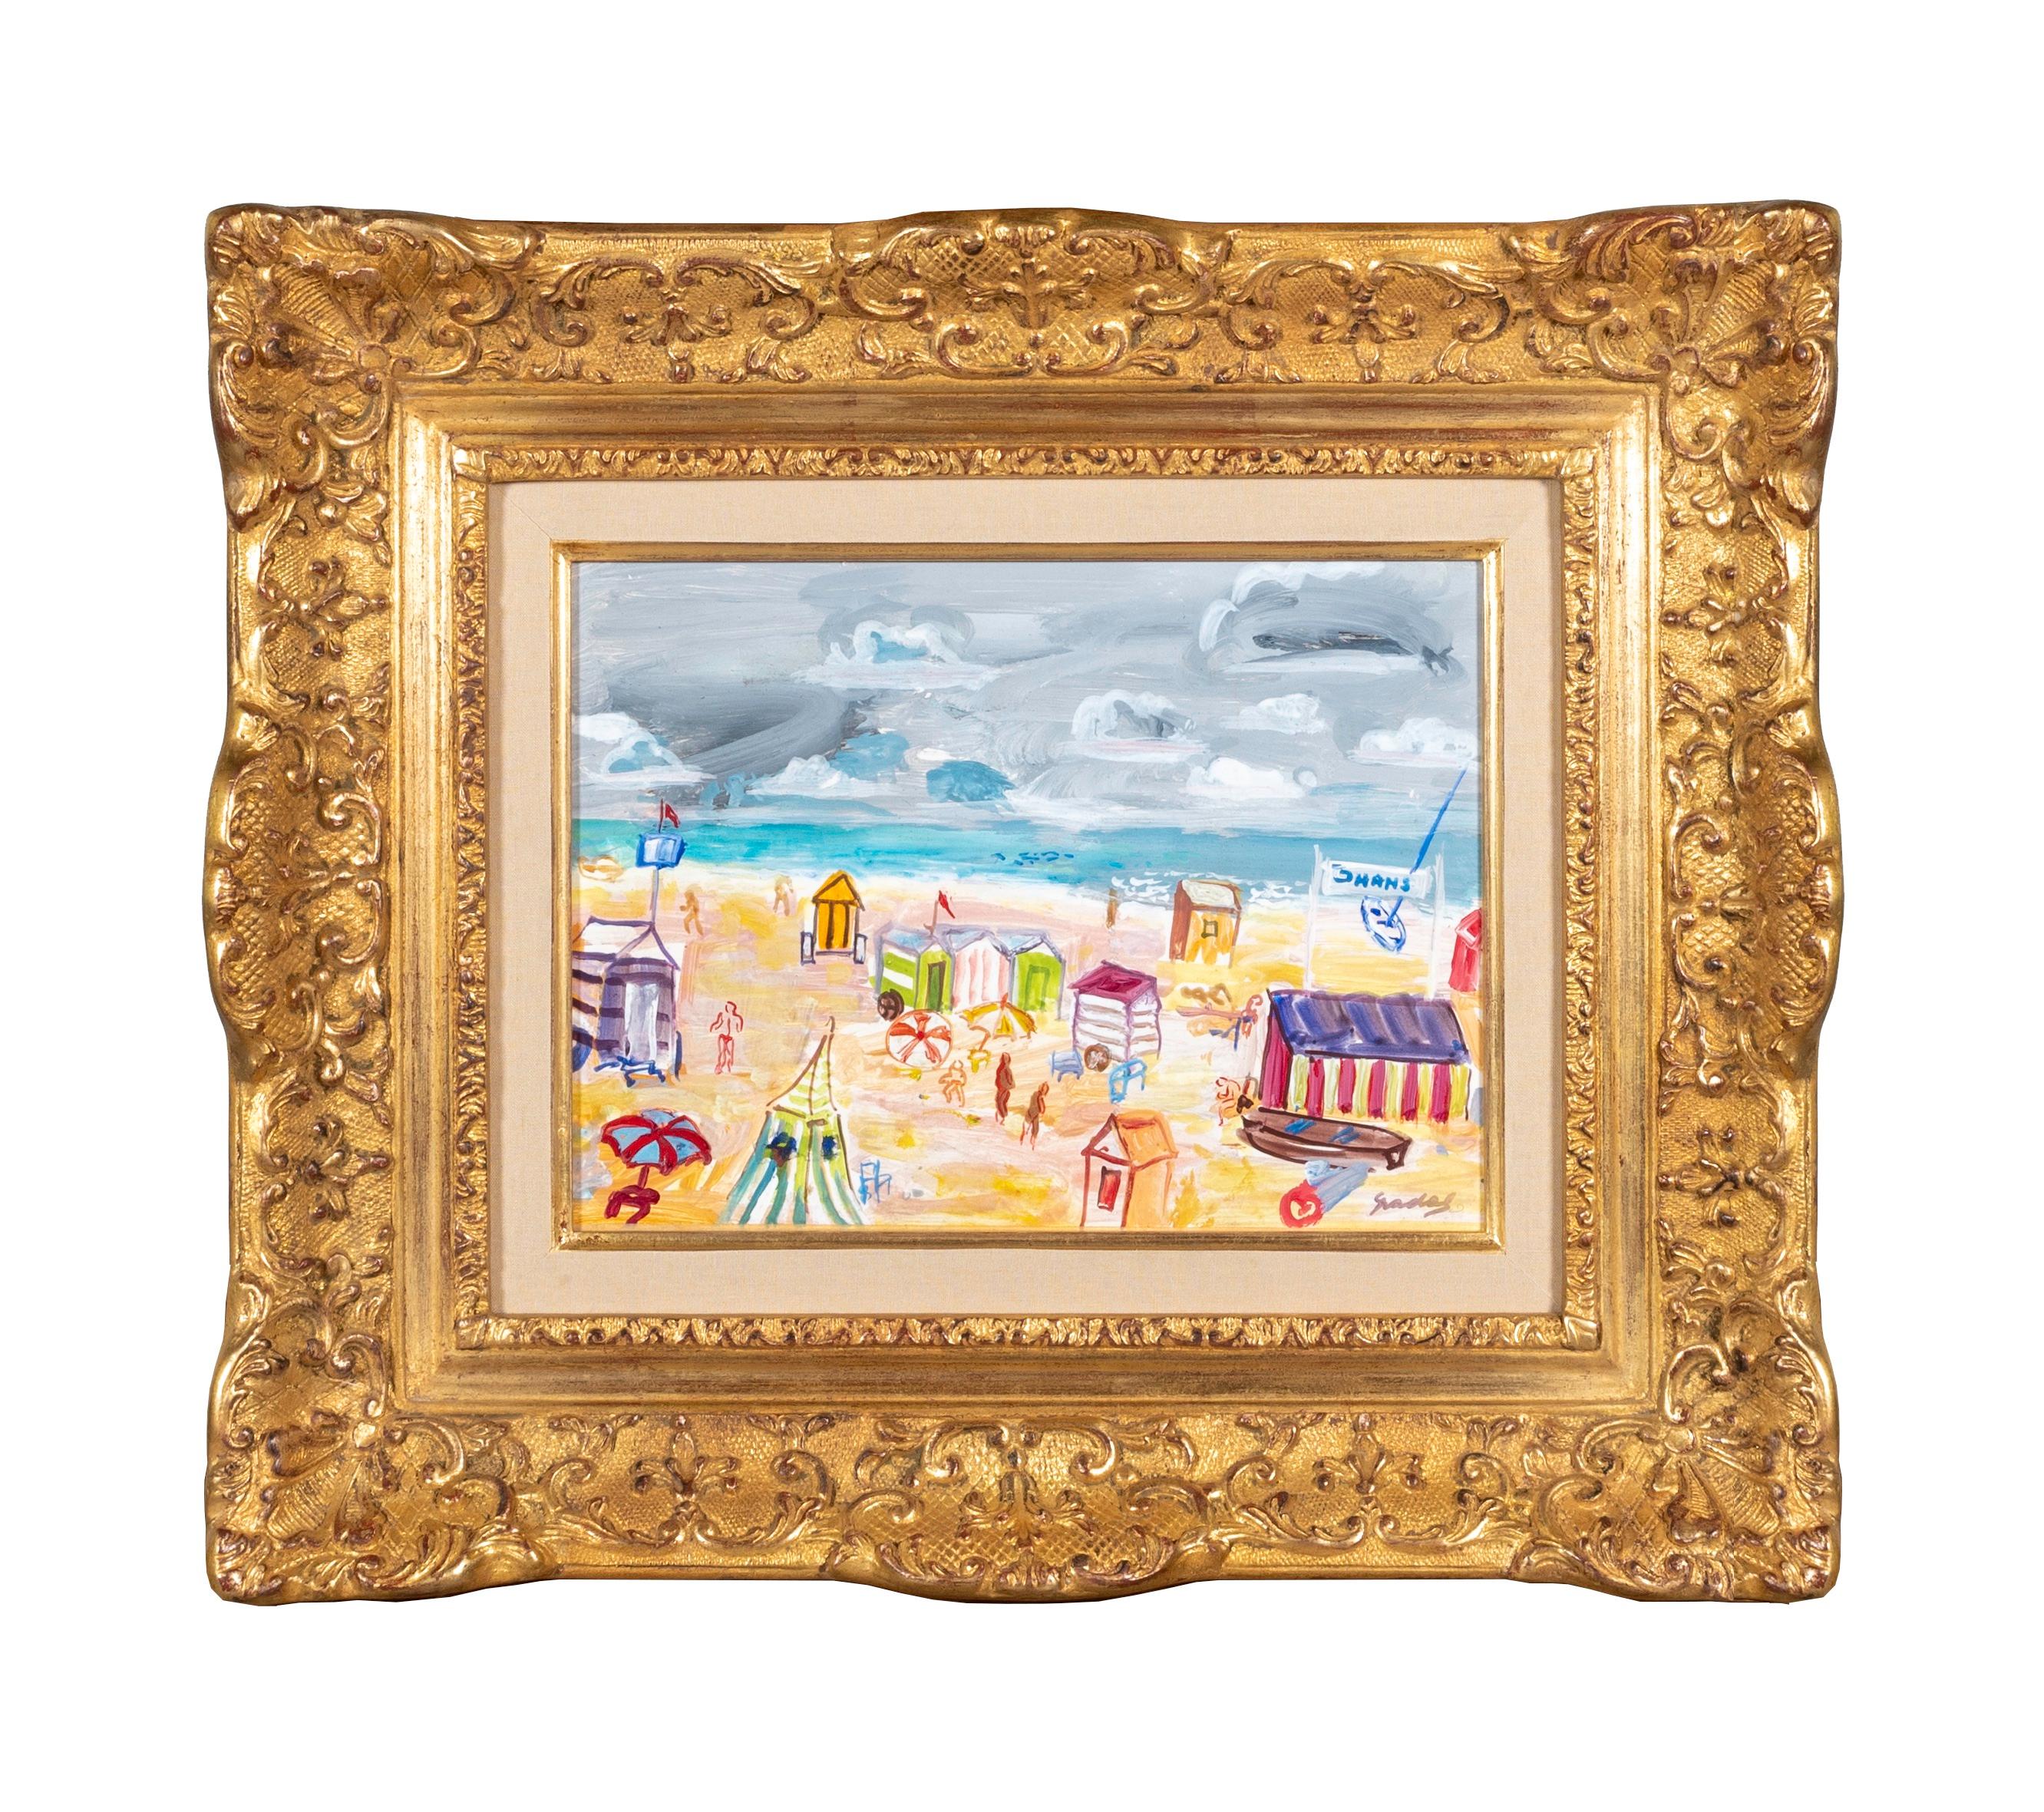 Carlos Nadal Landscape Painting - 'The Beach' Colourful Abstract figurative painting of a beach with figures, huts